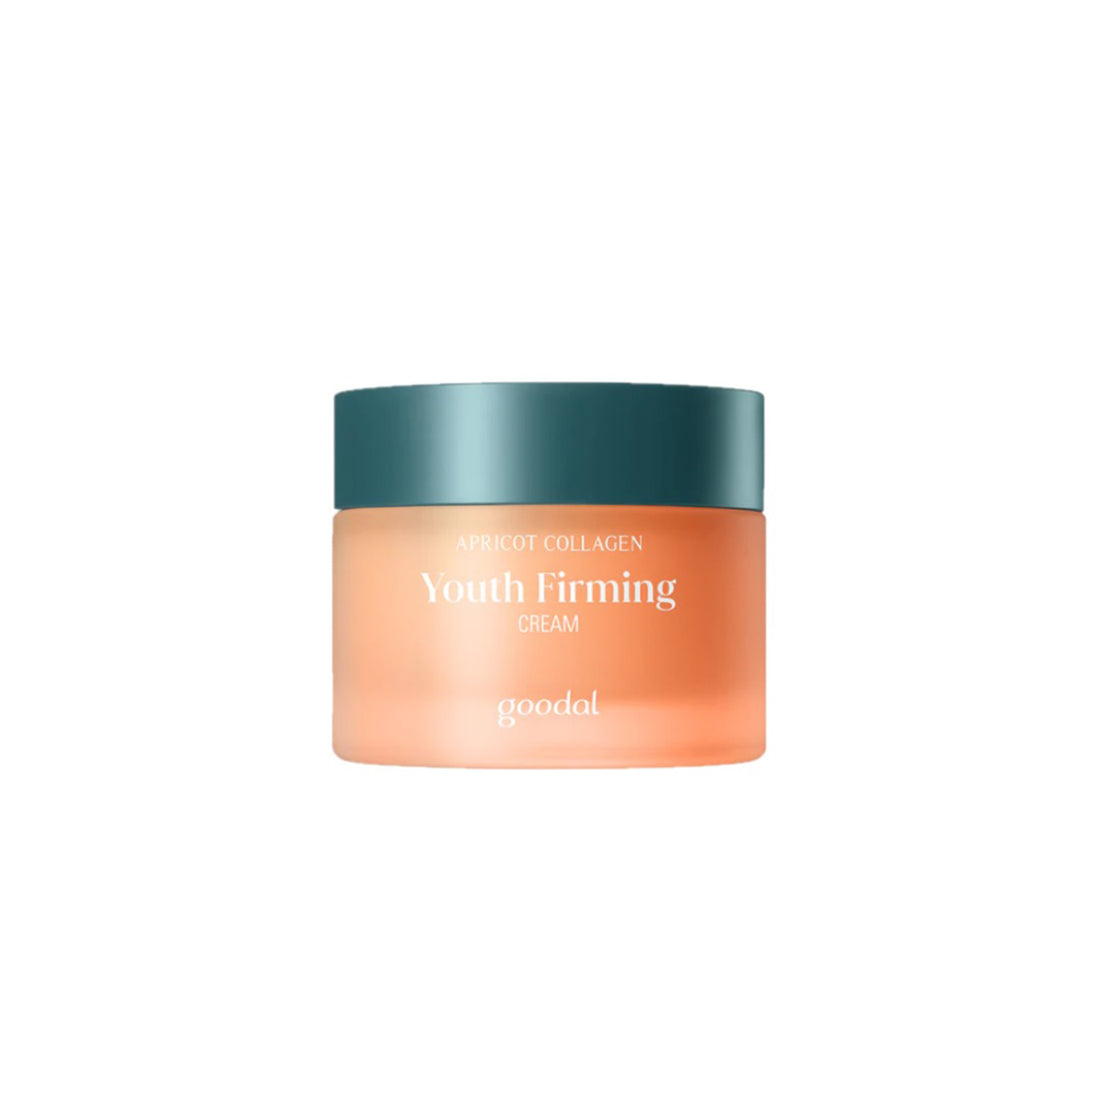 Goodal Apricot Collagen Youth Firming Cream